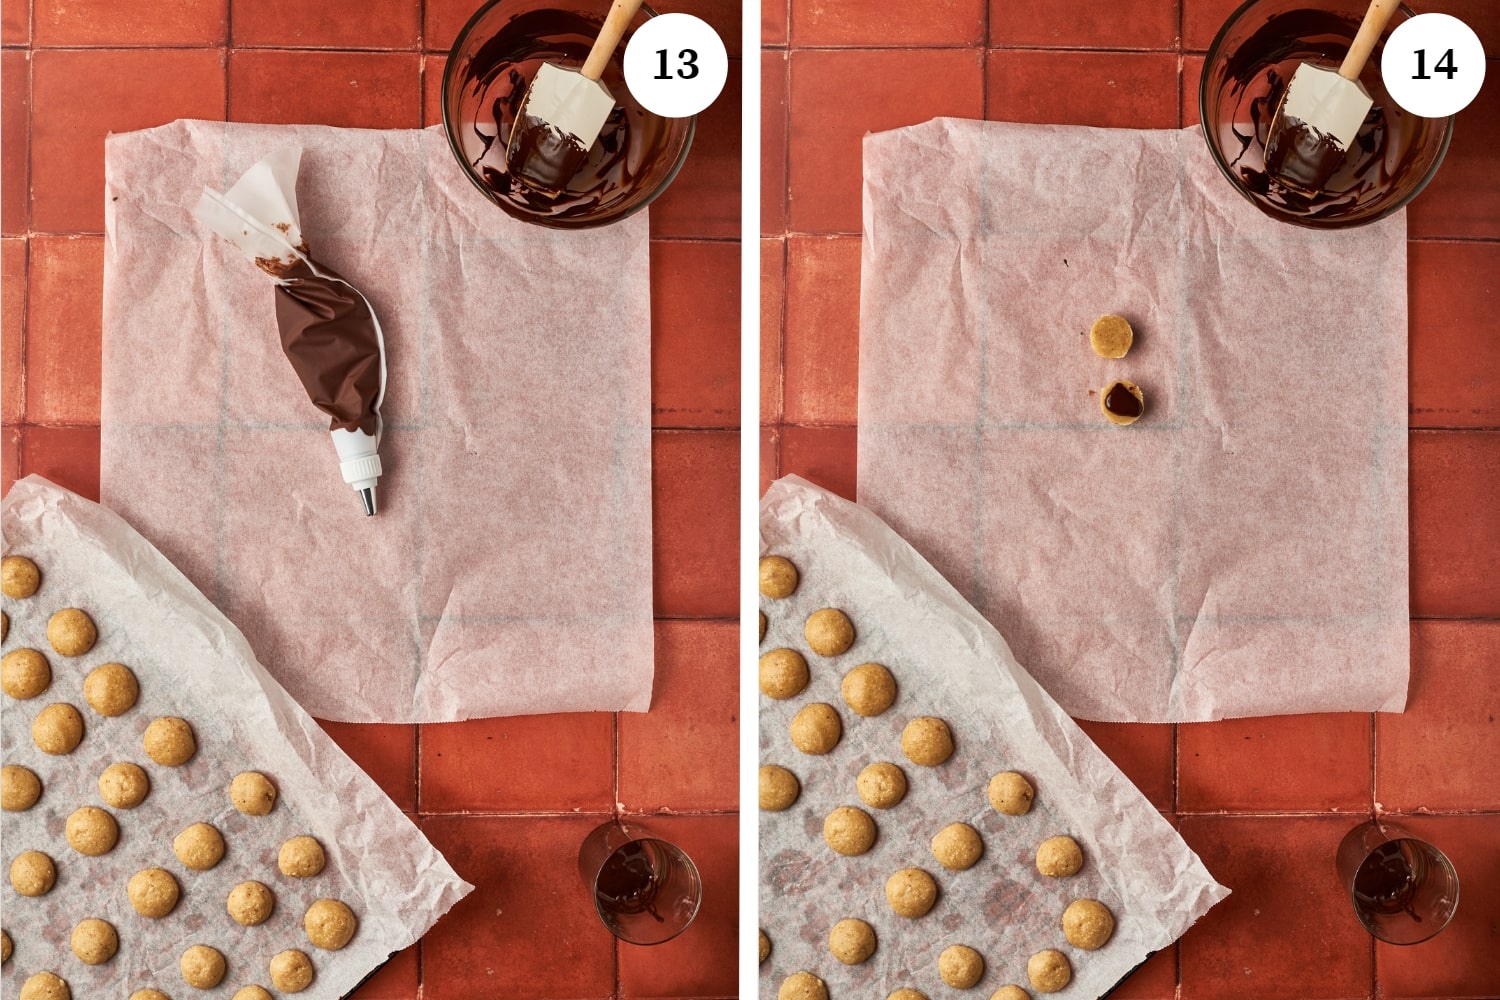 first photo is a piping bag with chocolate inside on top of a parchment paper beside a tray of cookies and a bowl of melted chocolate. second photo is a cookie with a dallop of melted chocolate on top of a parchment paper next to a pan of cookies and bowl of melted chocolate.